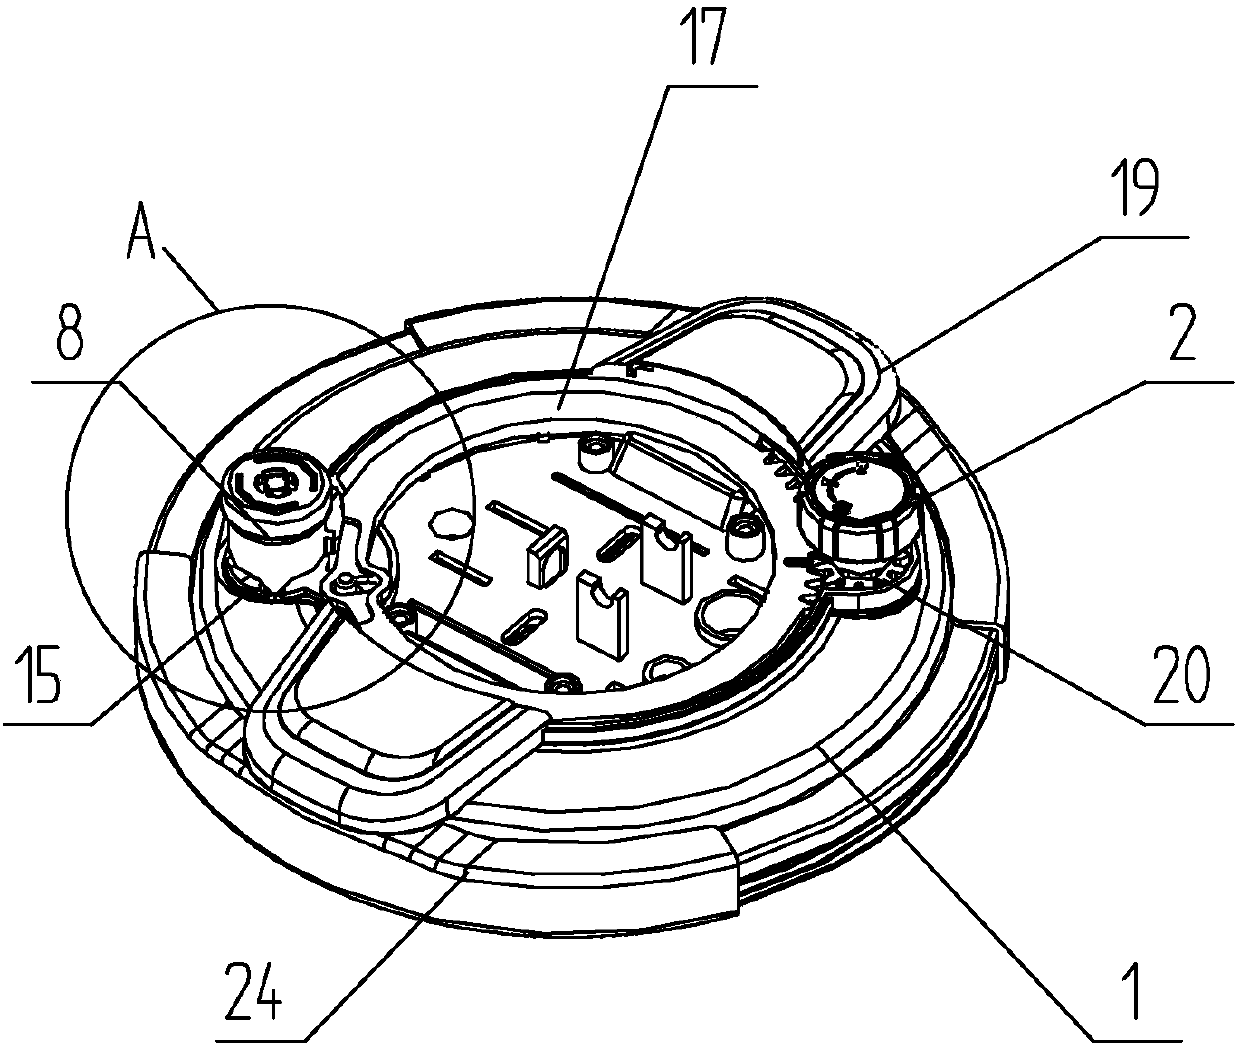 Pressure cooker with pressure-limiting valve control structure